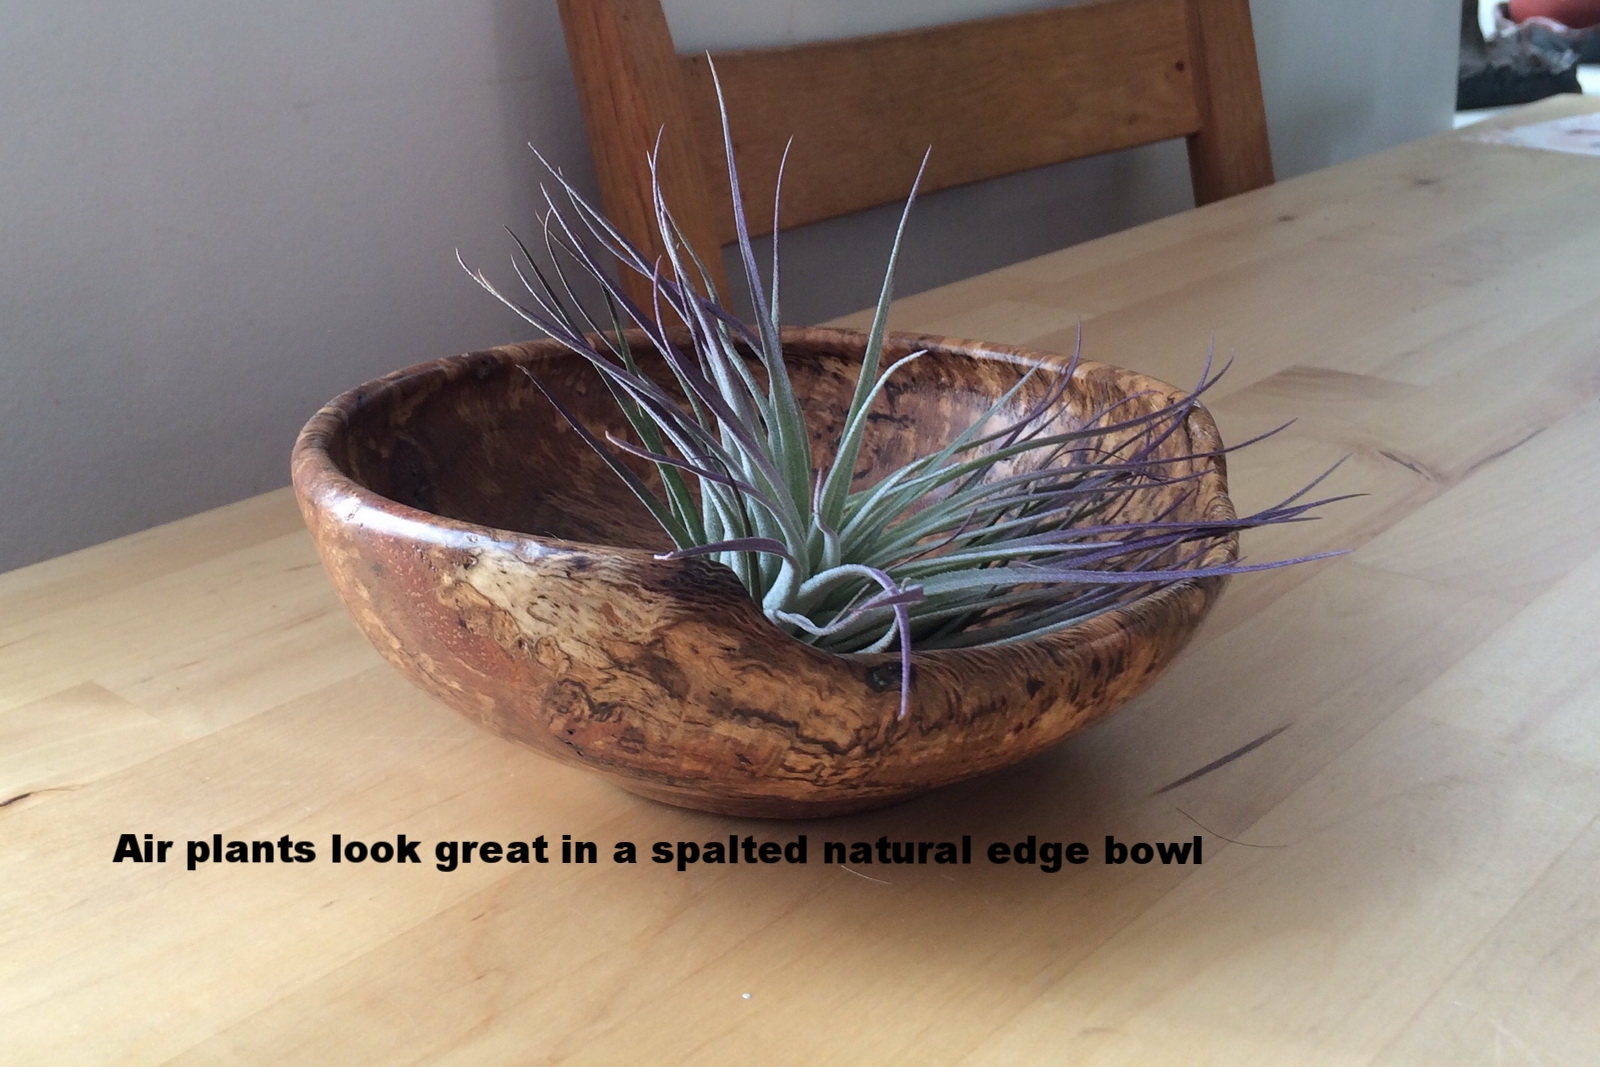 Kate's air plant crop and resize.jpg